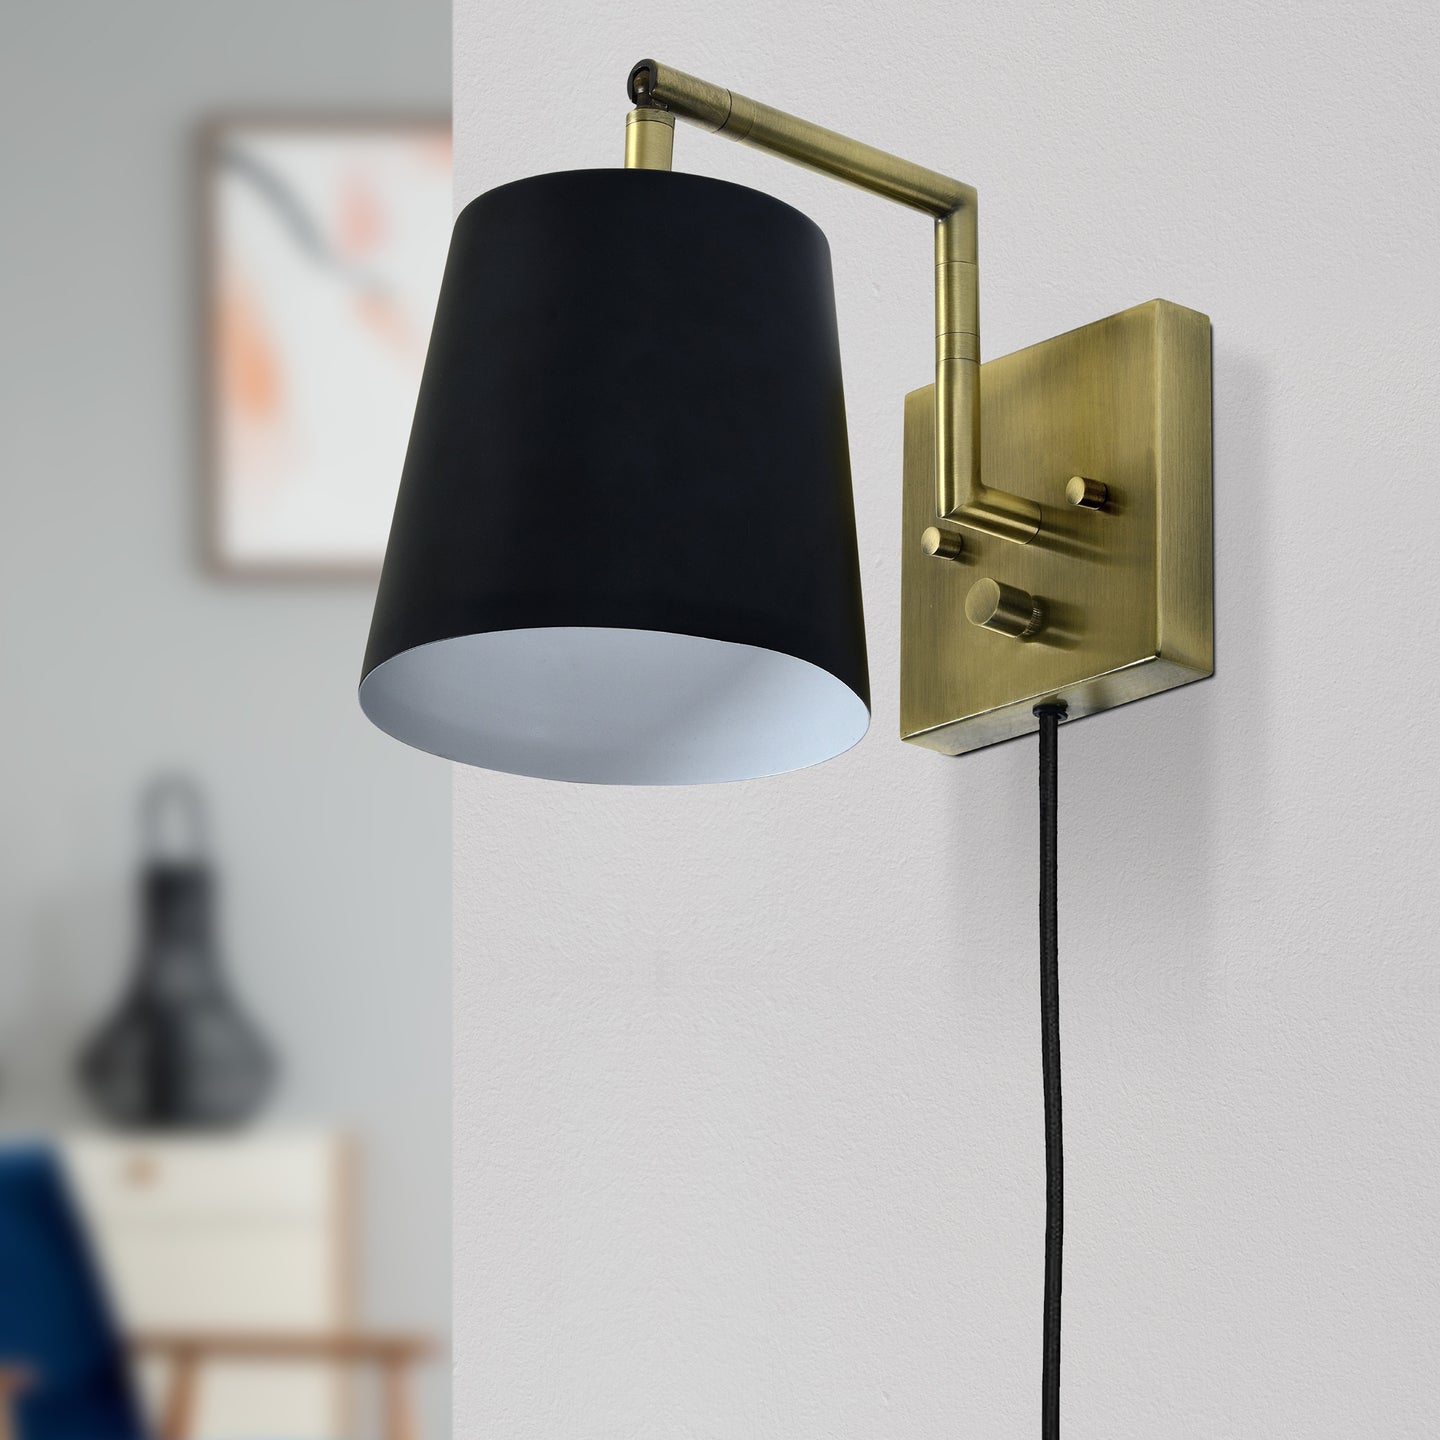 Gramercy Wall Sconce - Furniture Depot